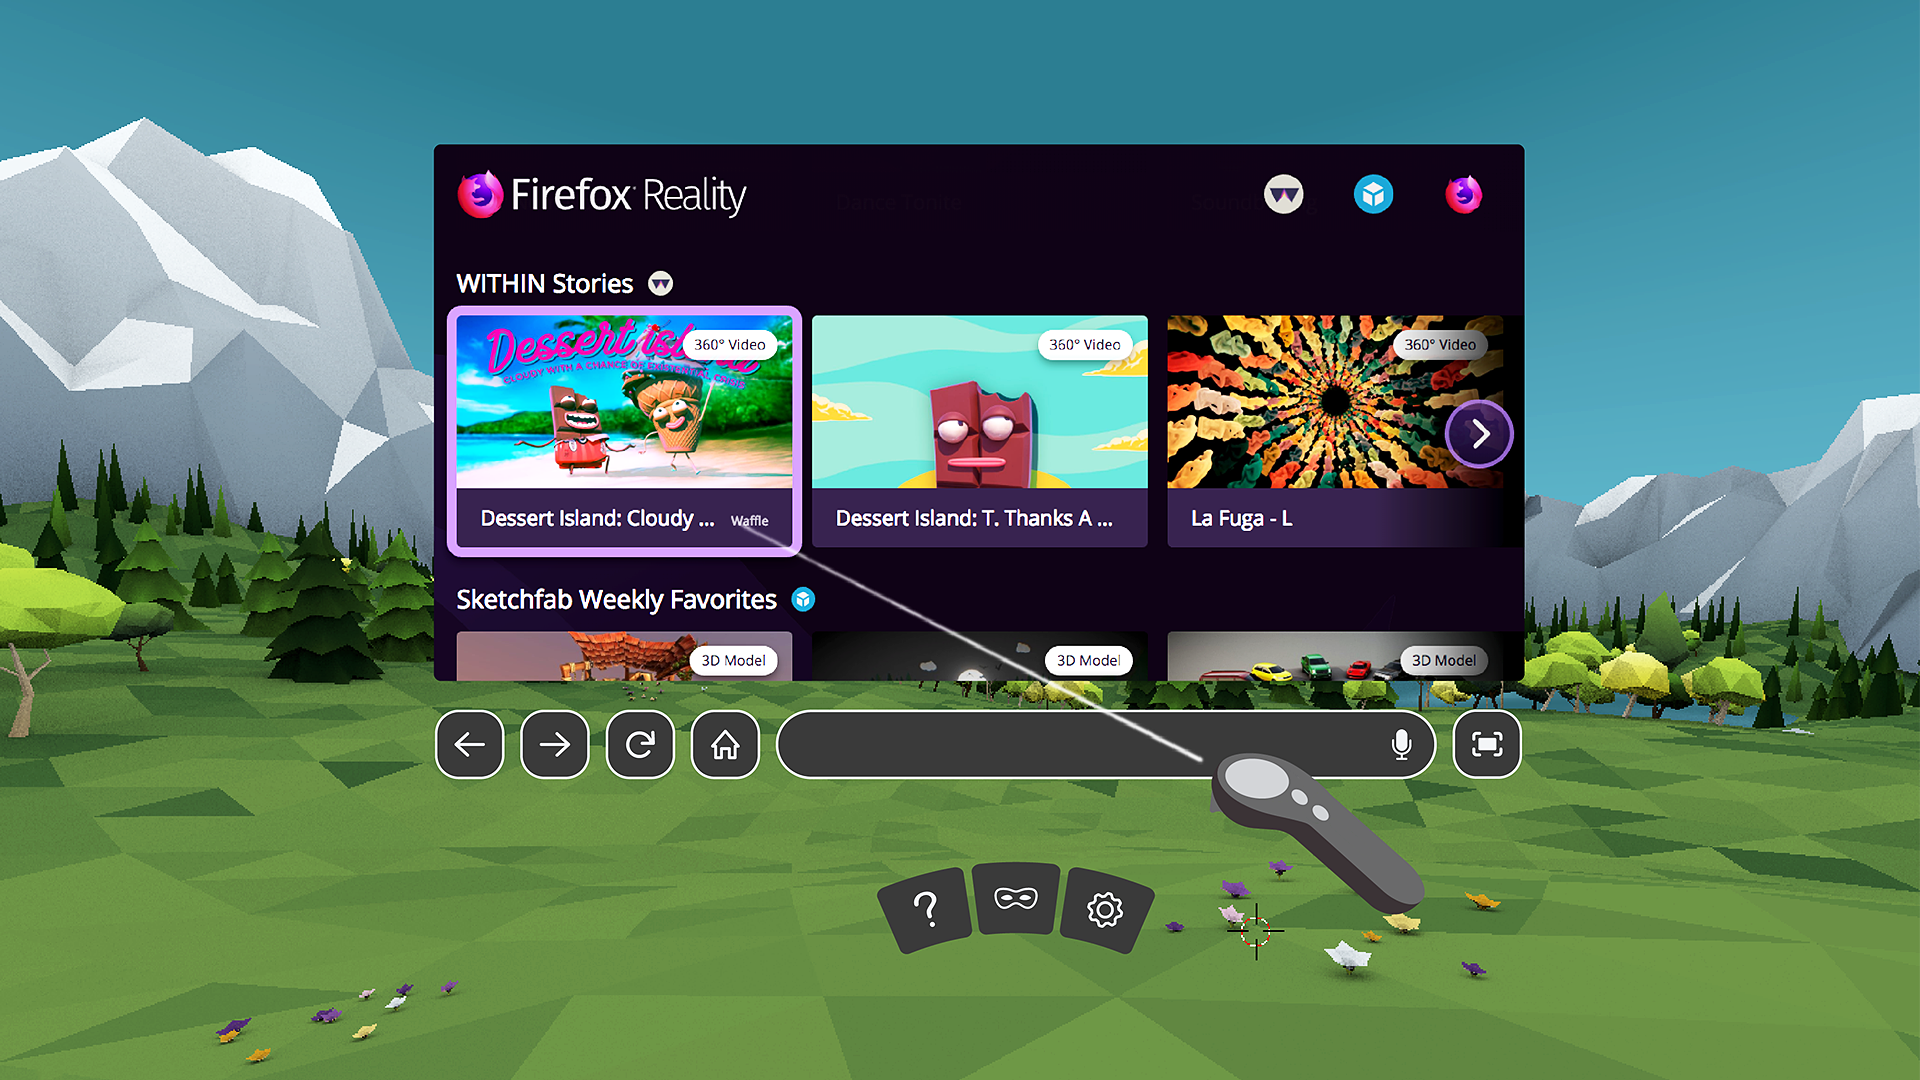 Firefox Reality Browser in VR Headset as an example of immersive browsing